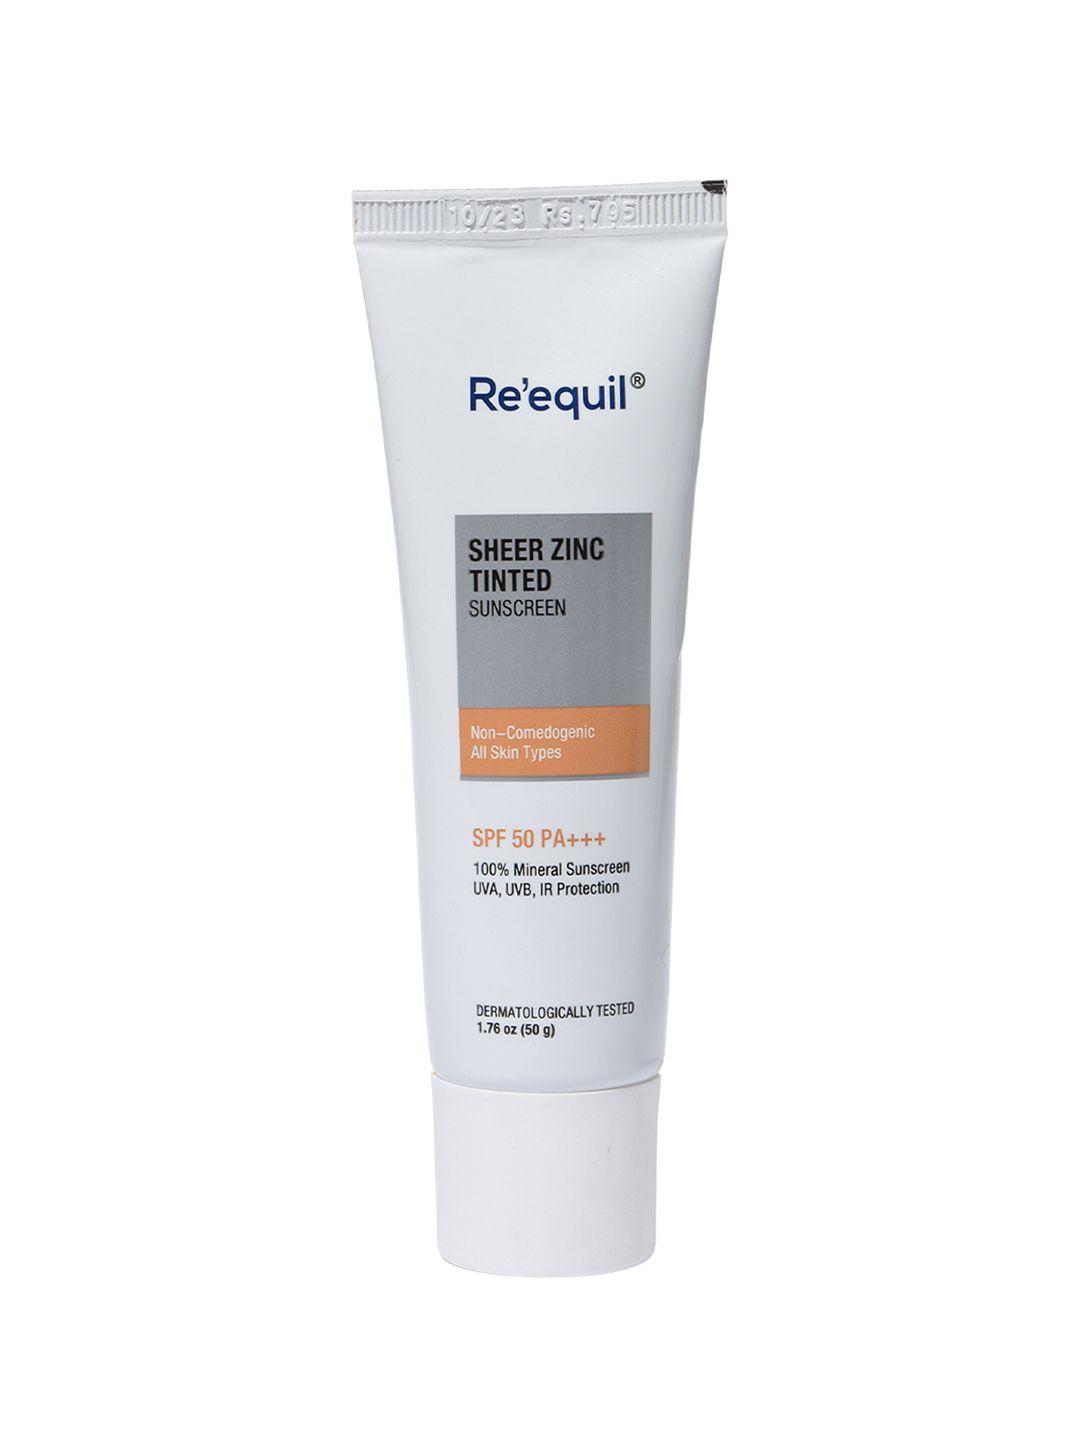 reequil unisex sheer zinc tinted spf 50 pa+++ mineral sunscreen with zinc oxide 50g